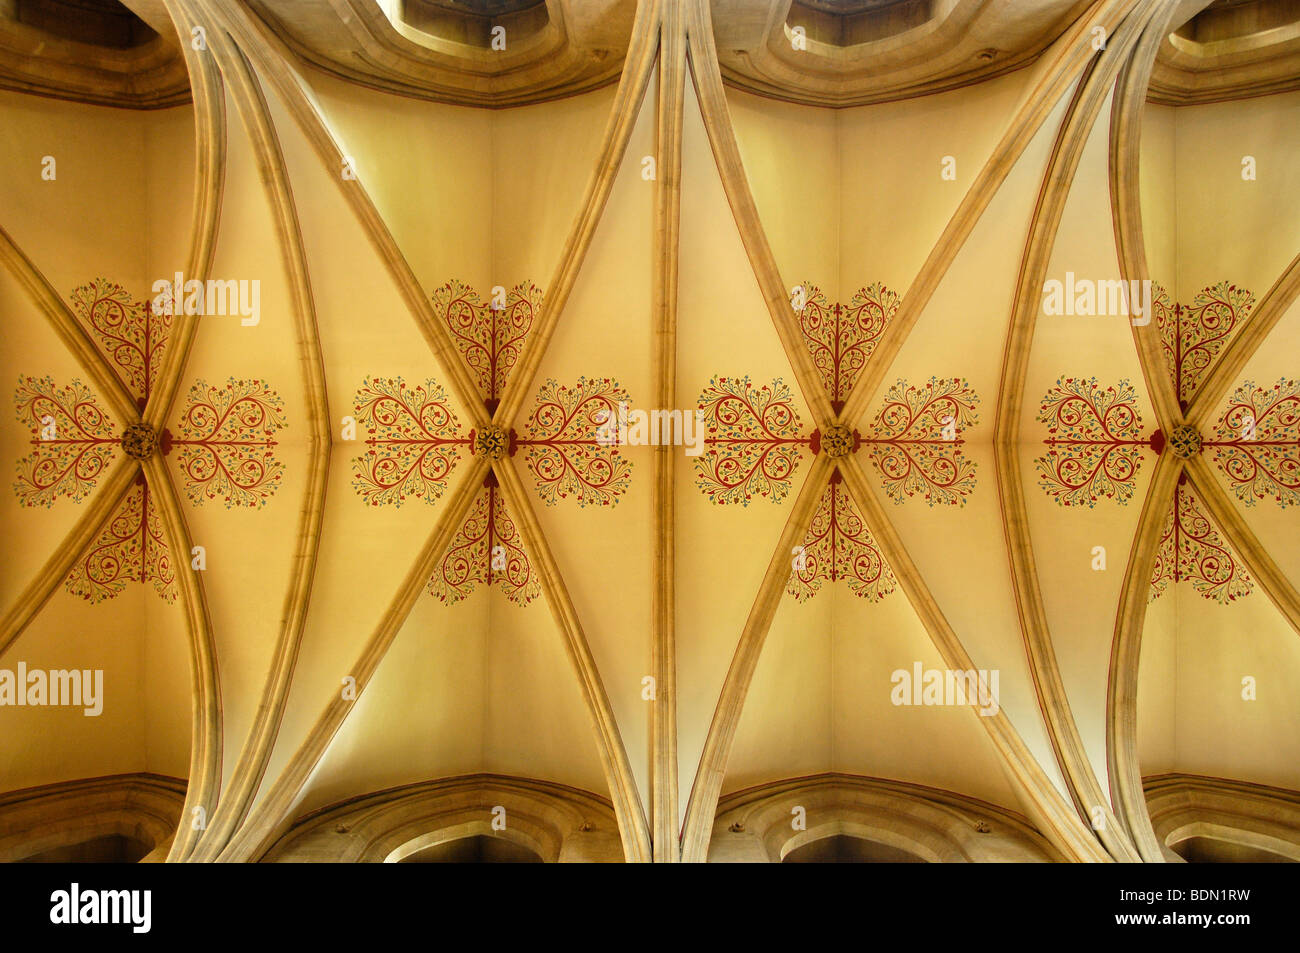 Ceiling arches of the Gothic Cathedral of St. Andrew's, Wells, England, UK Stock Photo